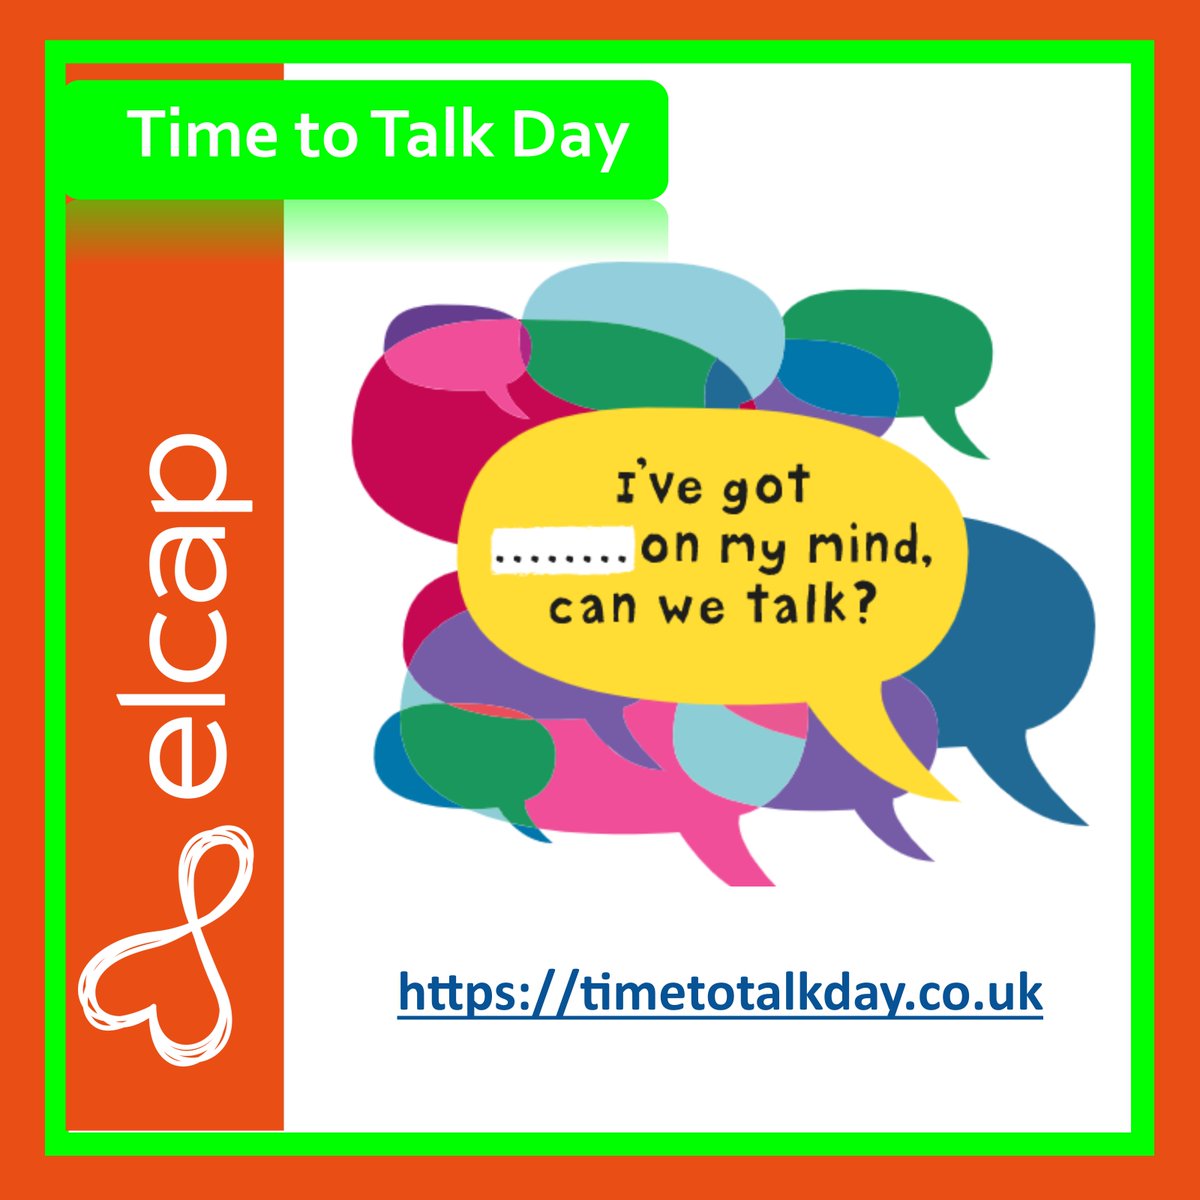 🖤 Today is Time to Talk Day - the nation’s biggest mental health conversation. Happening every year, it’s a day for friends, families, communities, and workplaces to come together to talk, listen and change lives. 🖤
timetotalkday.co.uk
#itscooltocare #itstimetotalkday